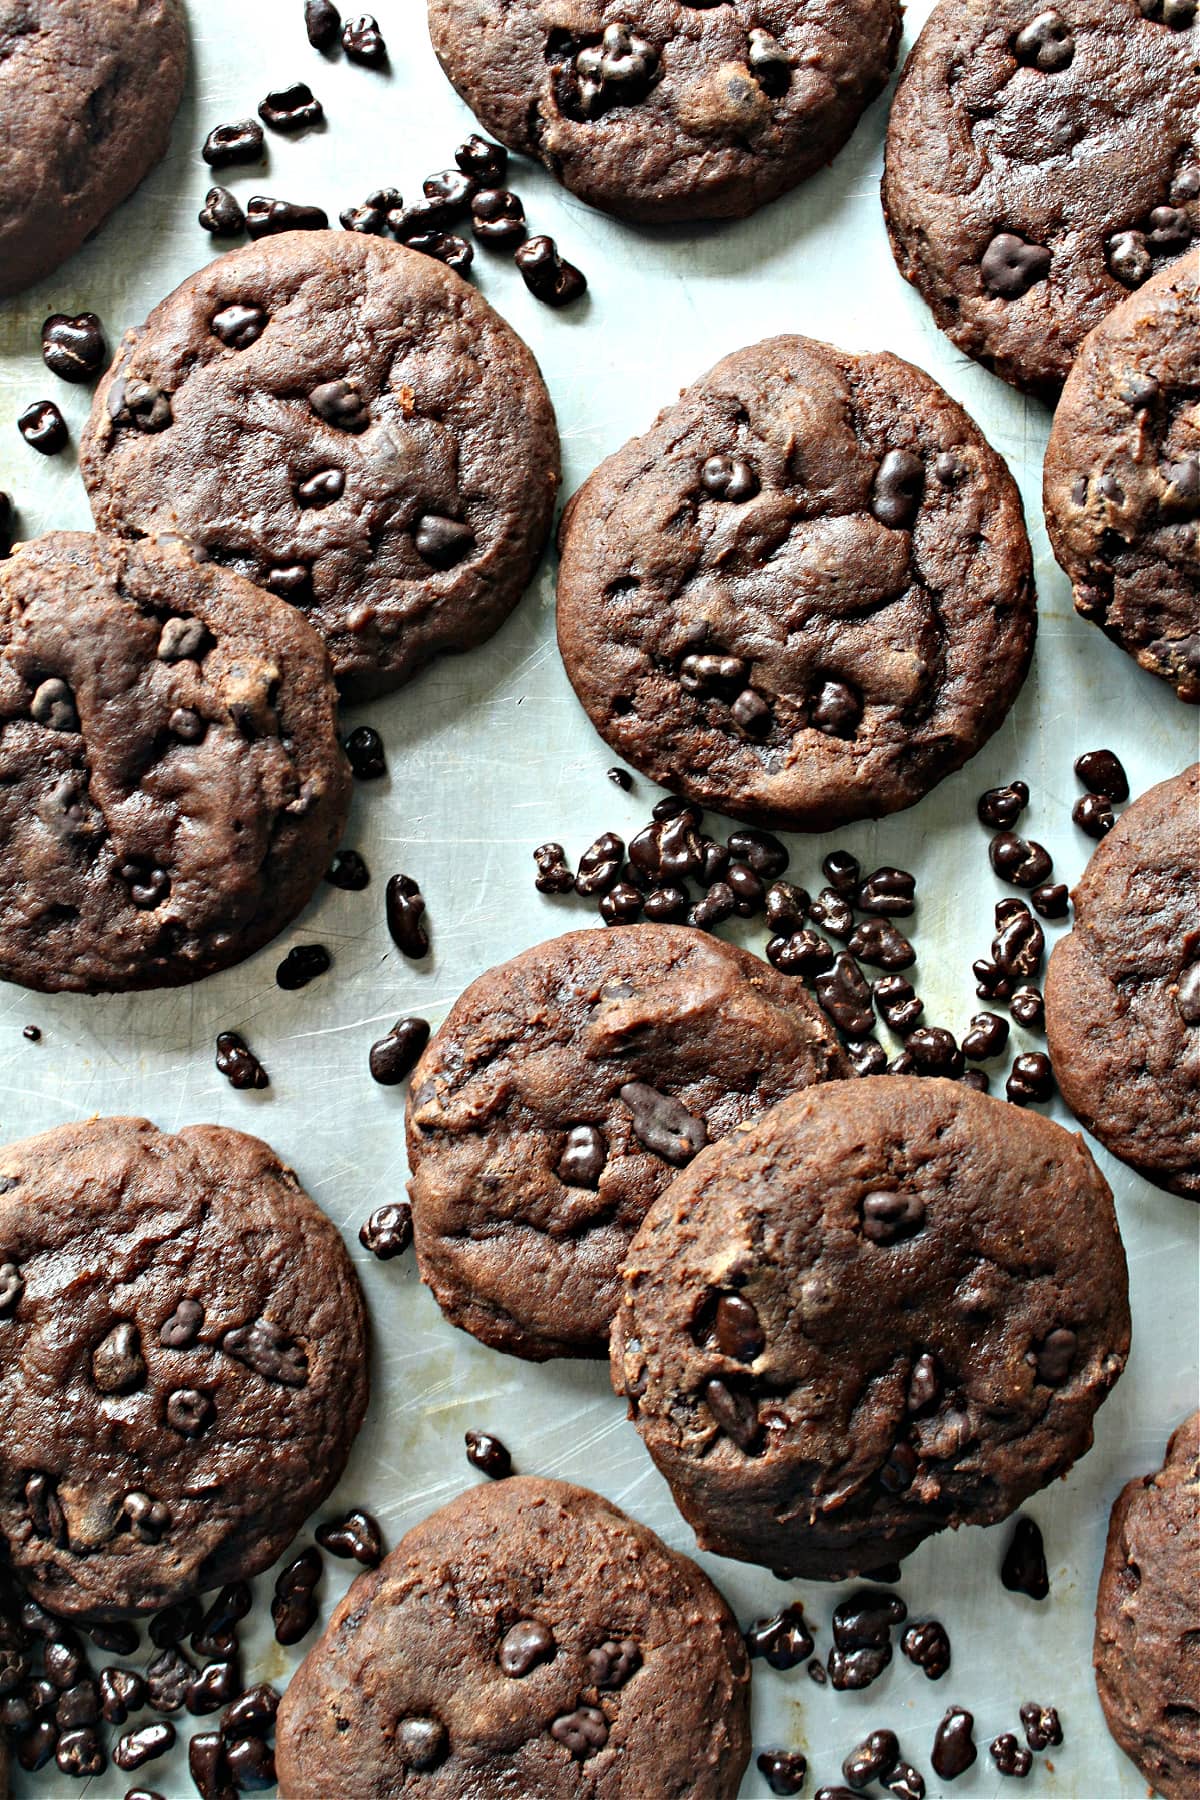 Chocolate cookies sprinkled with chocolate covered cocao nibs.